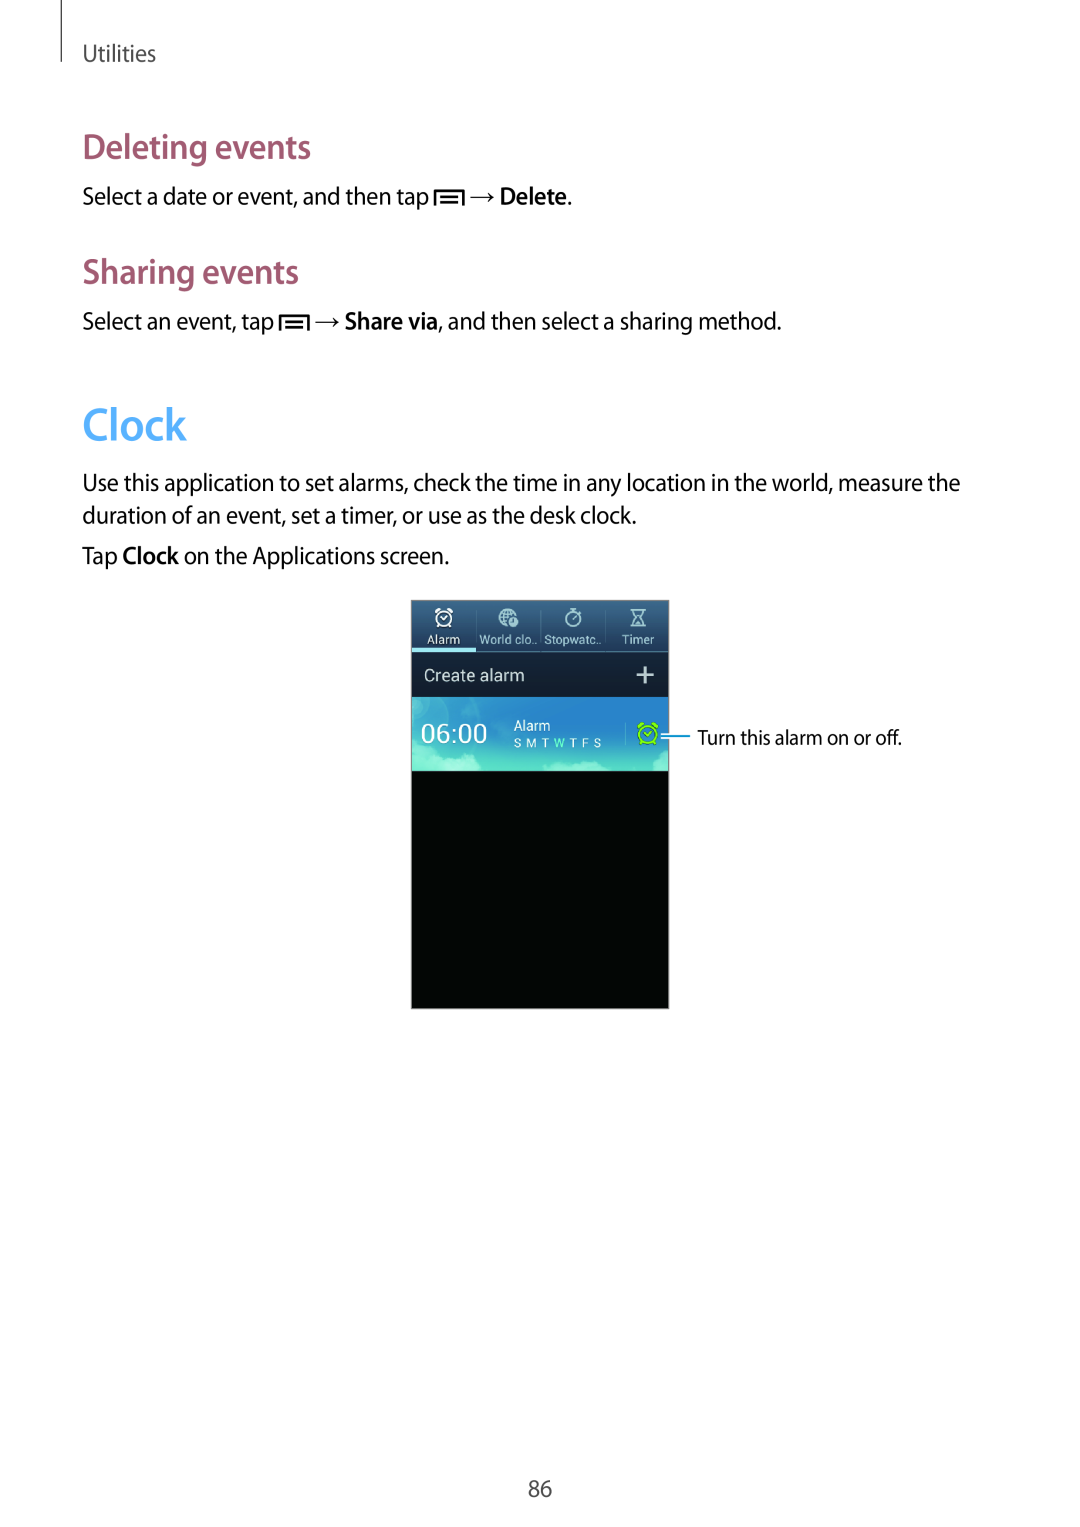 Samsung GT-I8190RWNFTM, GT-I8190RWNDTM manual Clock, Deleting events, Sharing events, Utilities, Turn this alarm on or off 